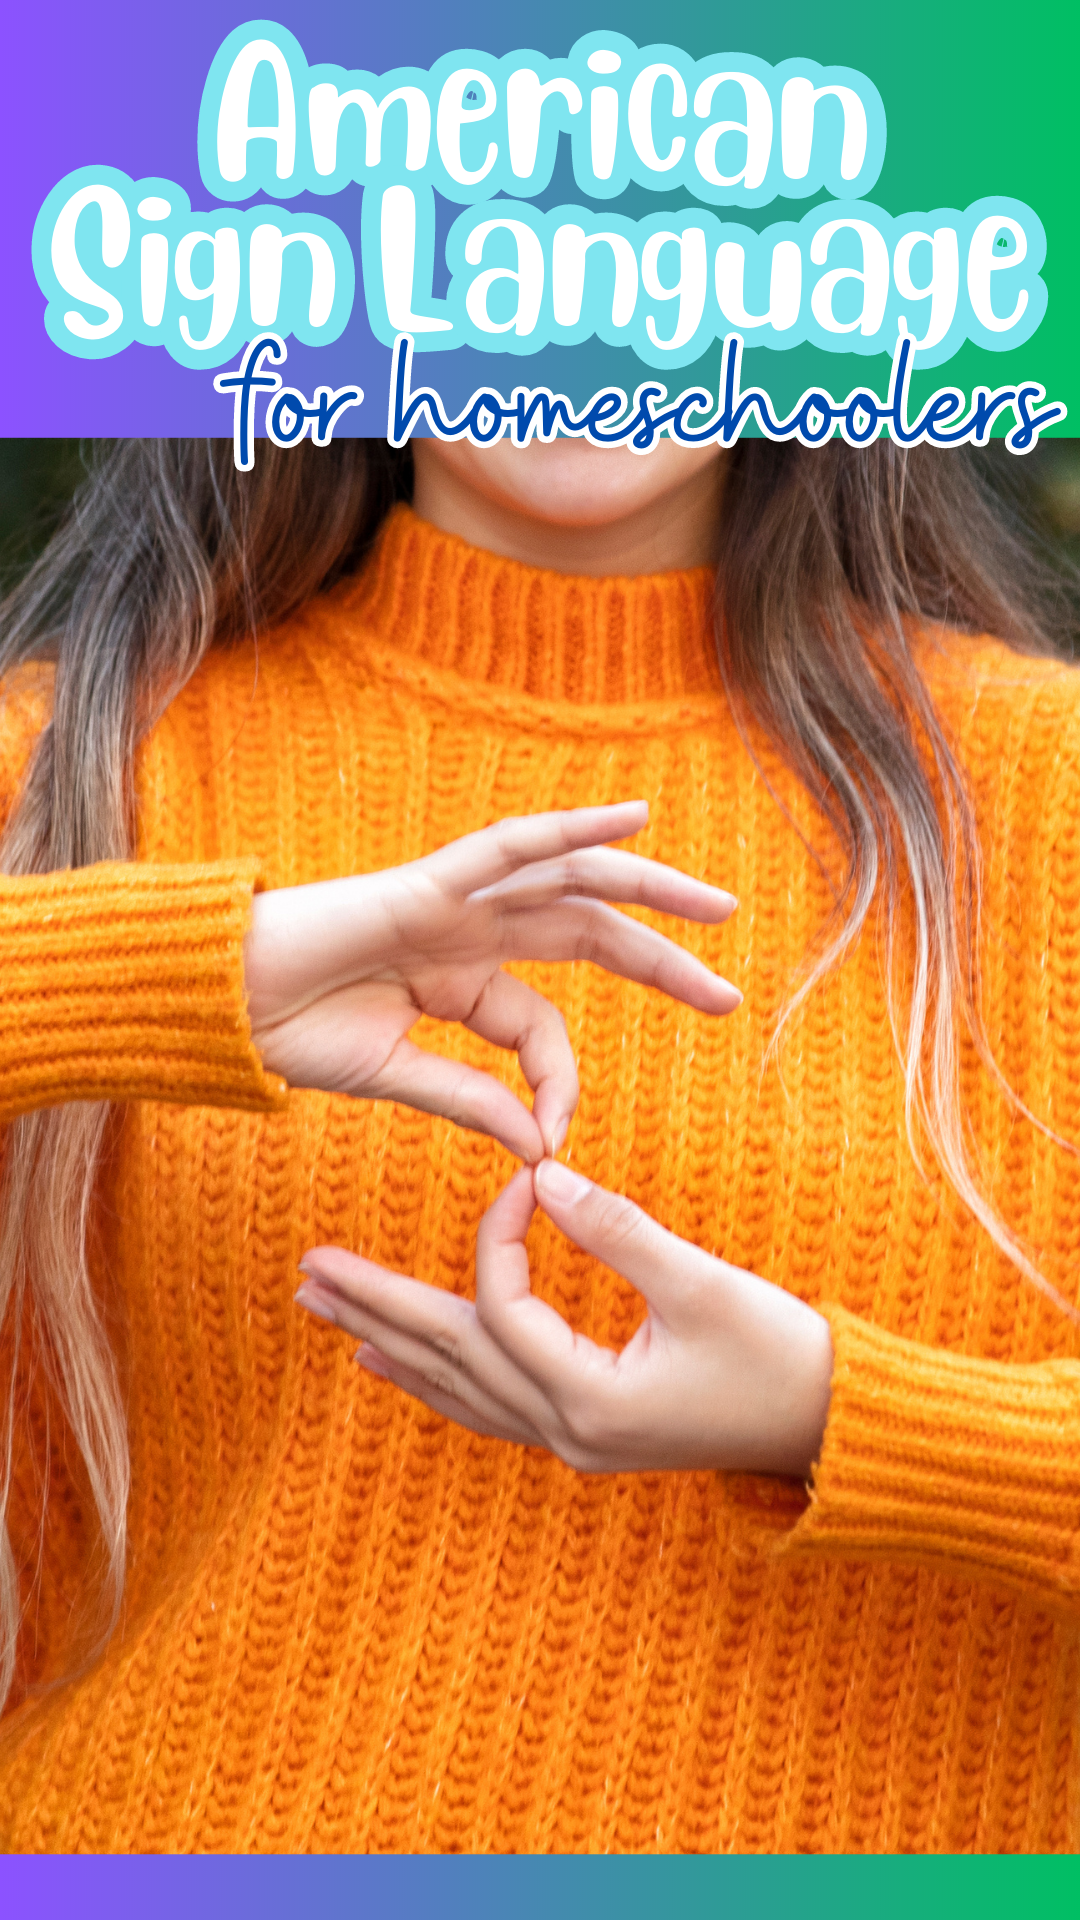 American Sign Language for Homeschoolers